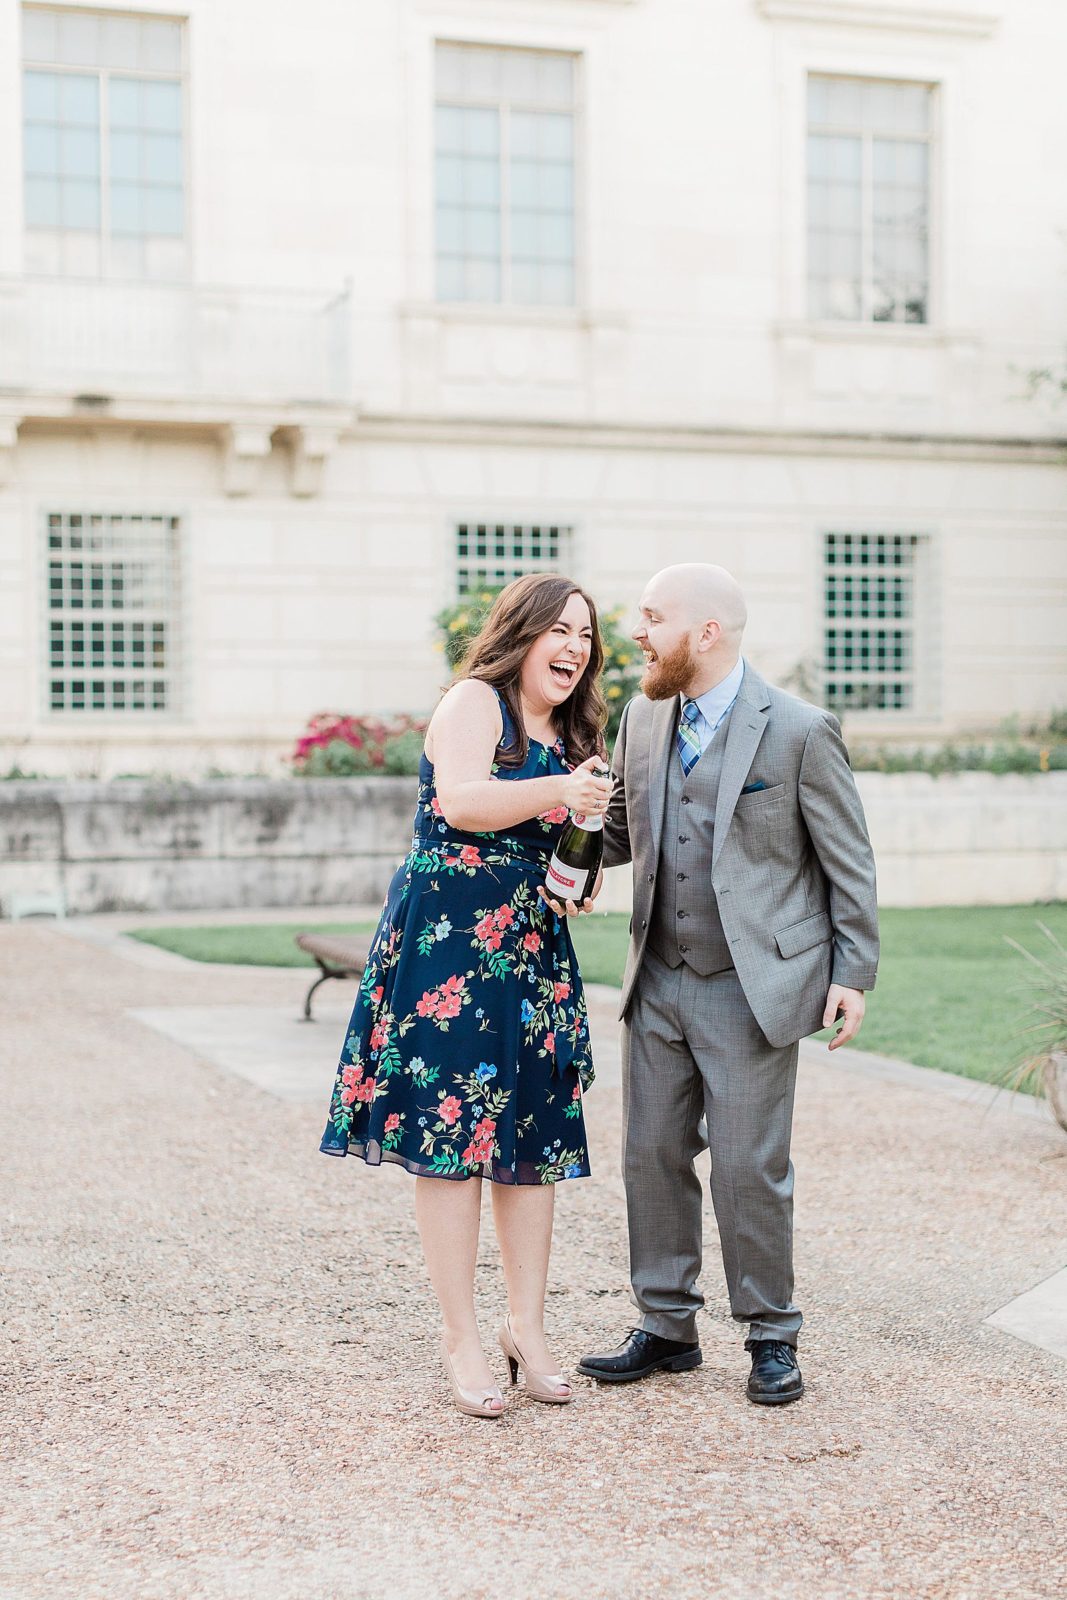 Engagement Pictures with Champagne Toast